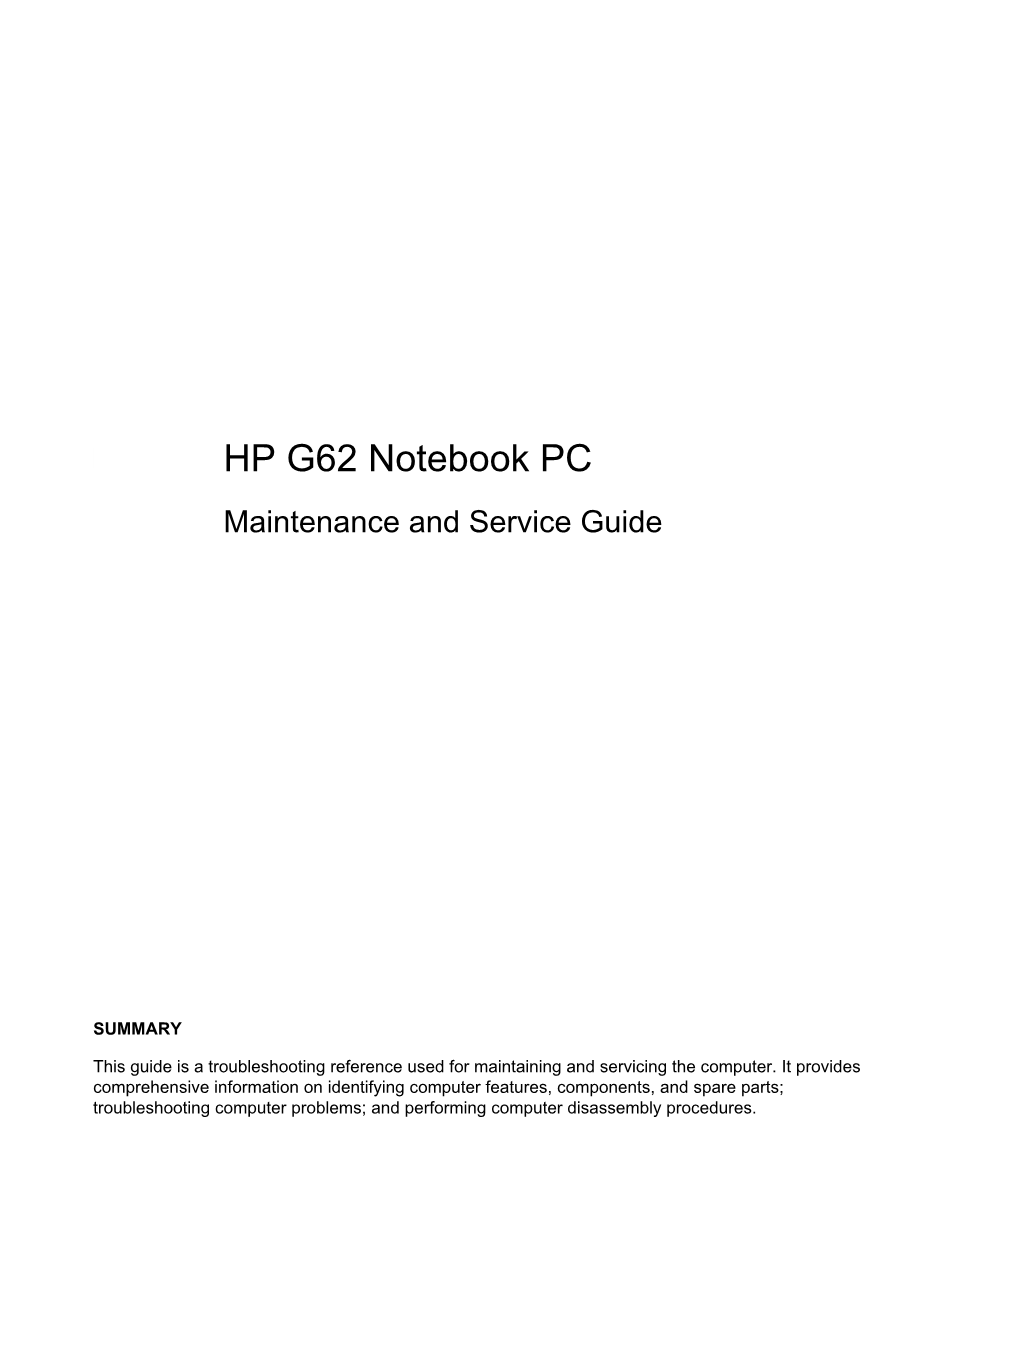 HP G62 Notebook PC Maintenance and Service Guide